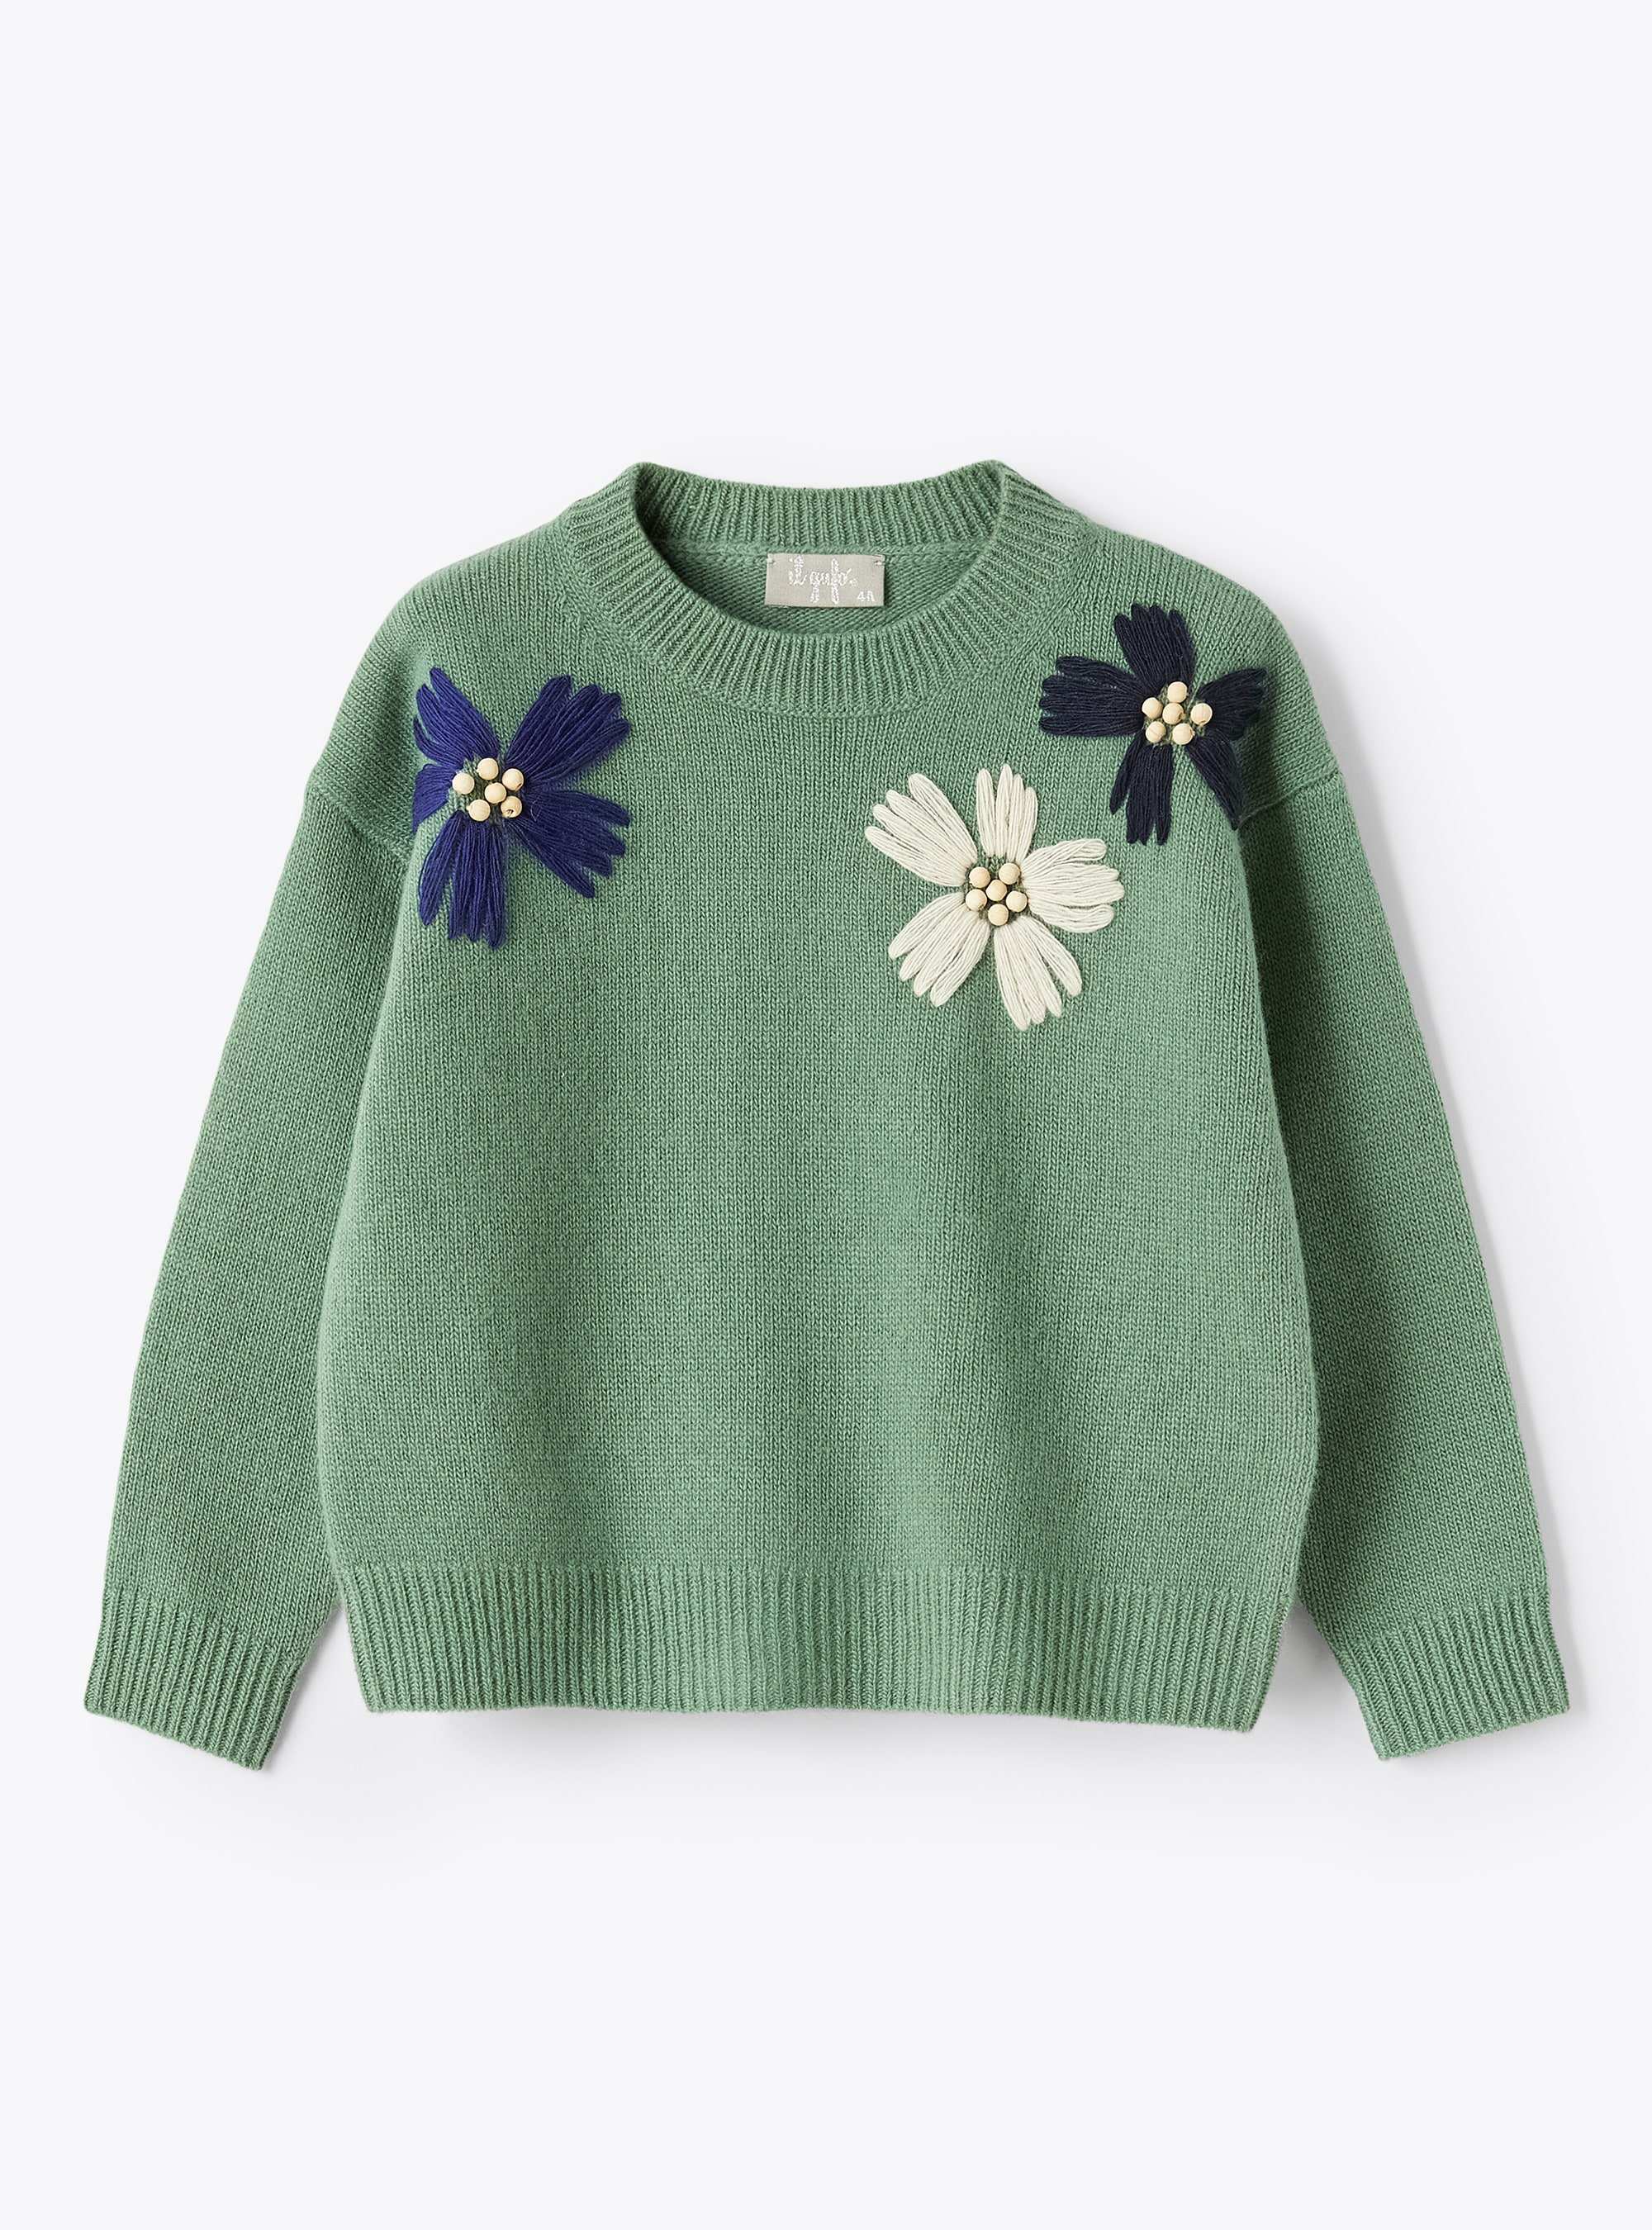 Flower embroidery green sweater - Sweaters - Il Gufo